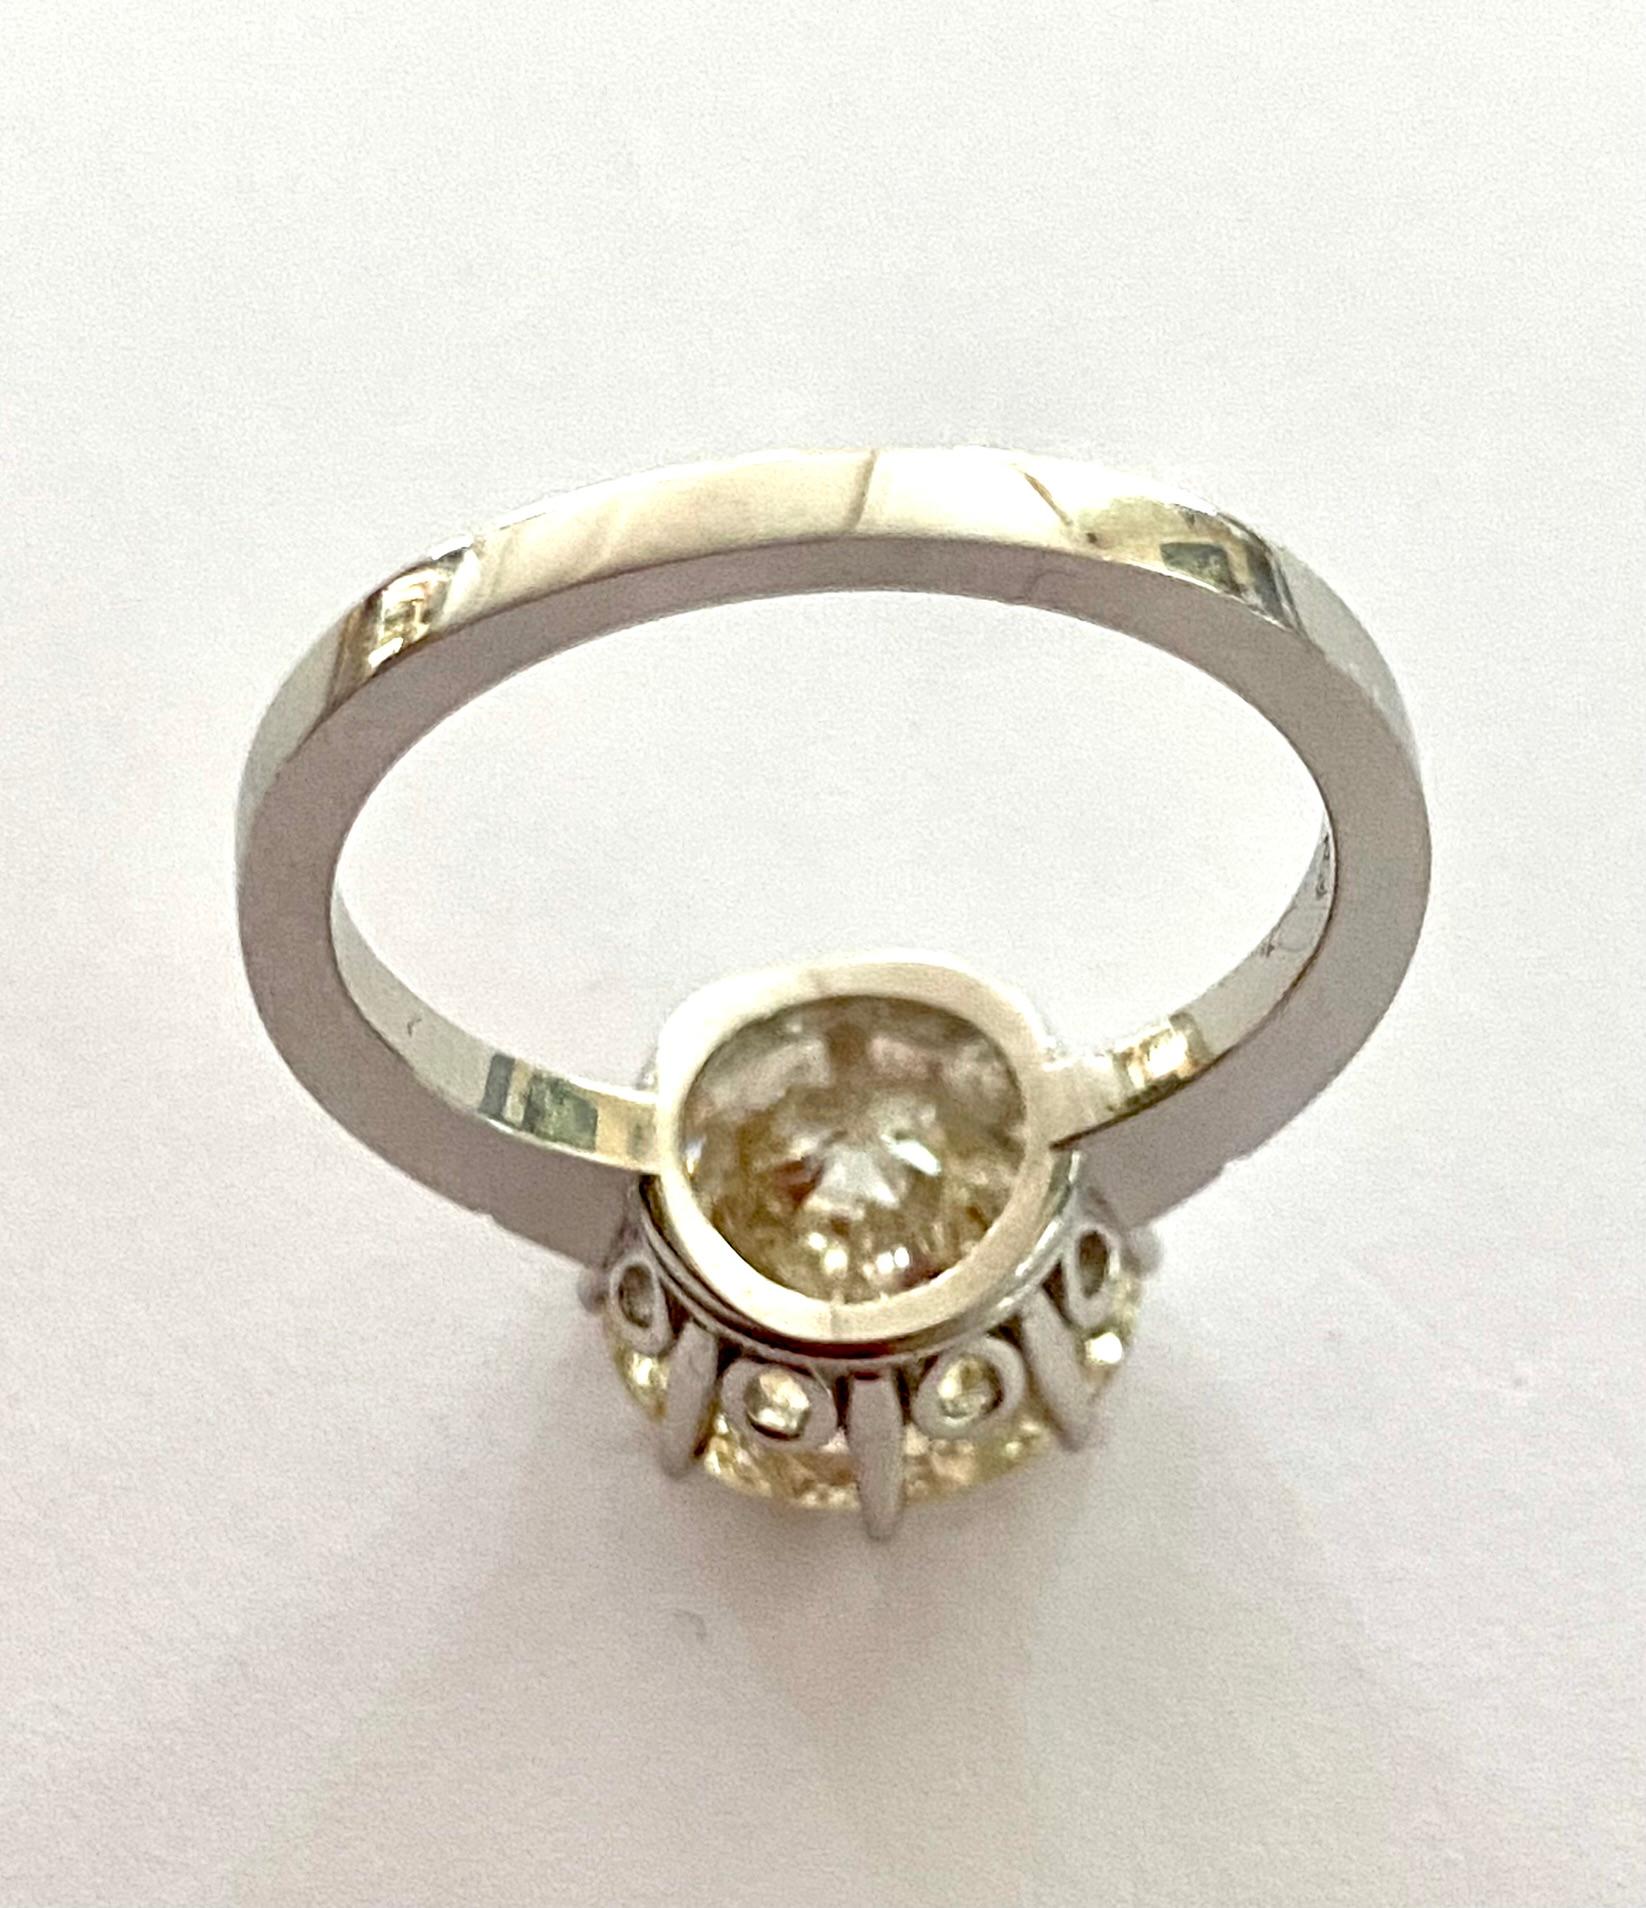 An 18K. white gold solitaire ring with a brilliant cut diamond of 5.56 ct.
Quality:   P2 (clear visible inclusion in the center of the stone)
color:      L = tinted white
Cut :       Old European cut.
-
the inclusion is easy to see, but the stone